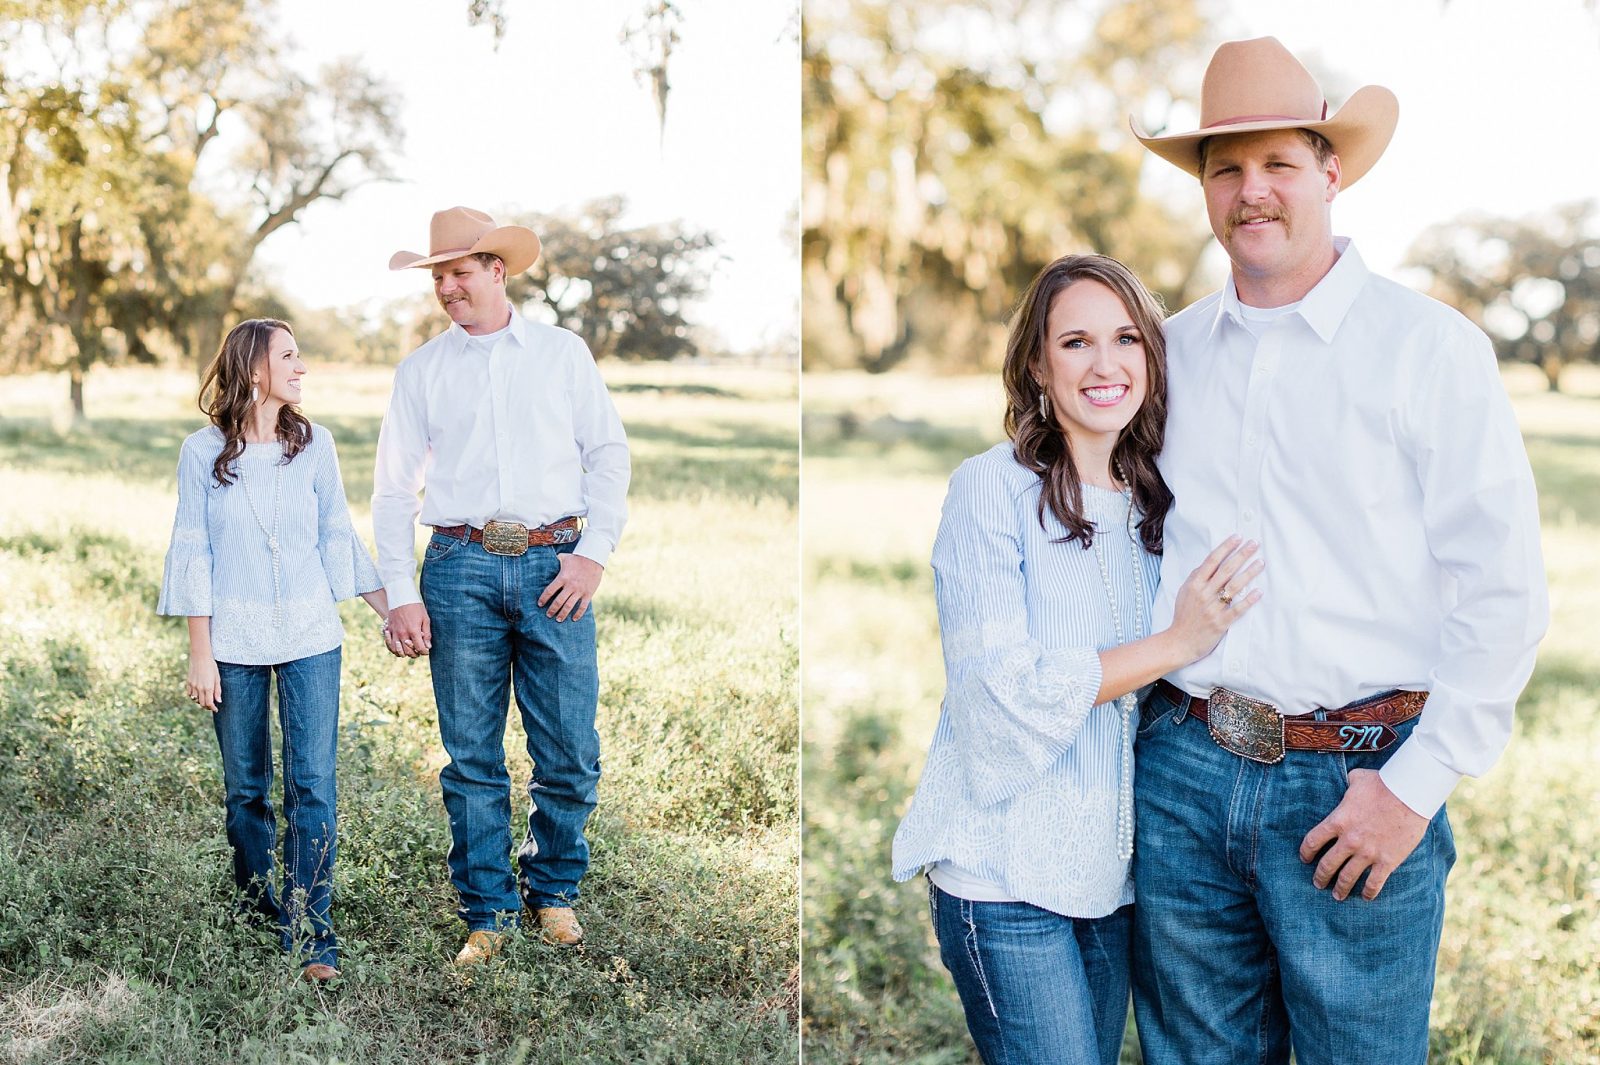 Meagan and Thomas | ourlittleranchphotography.com